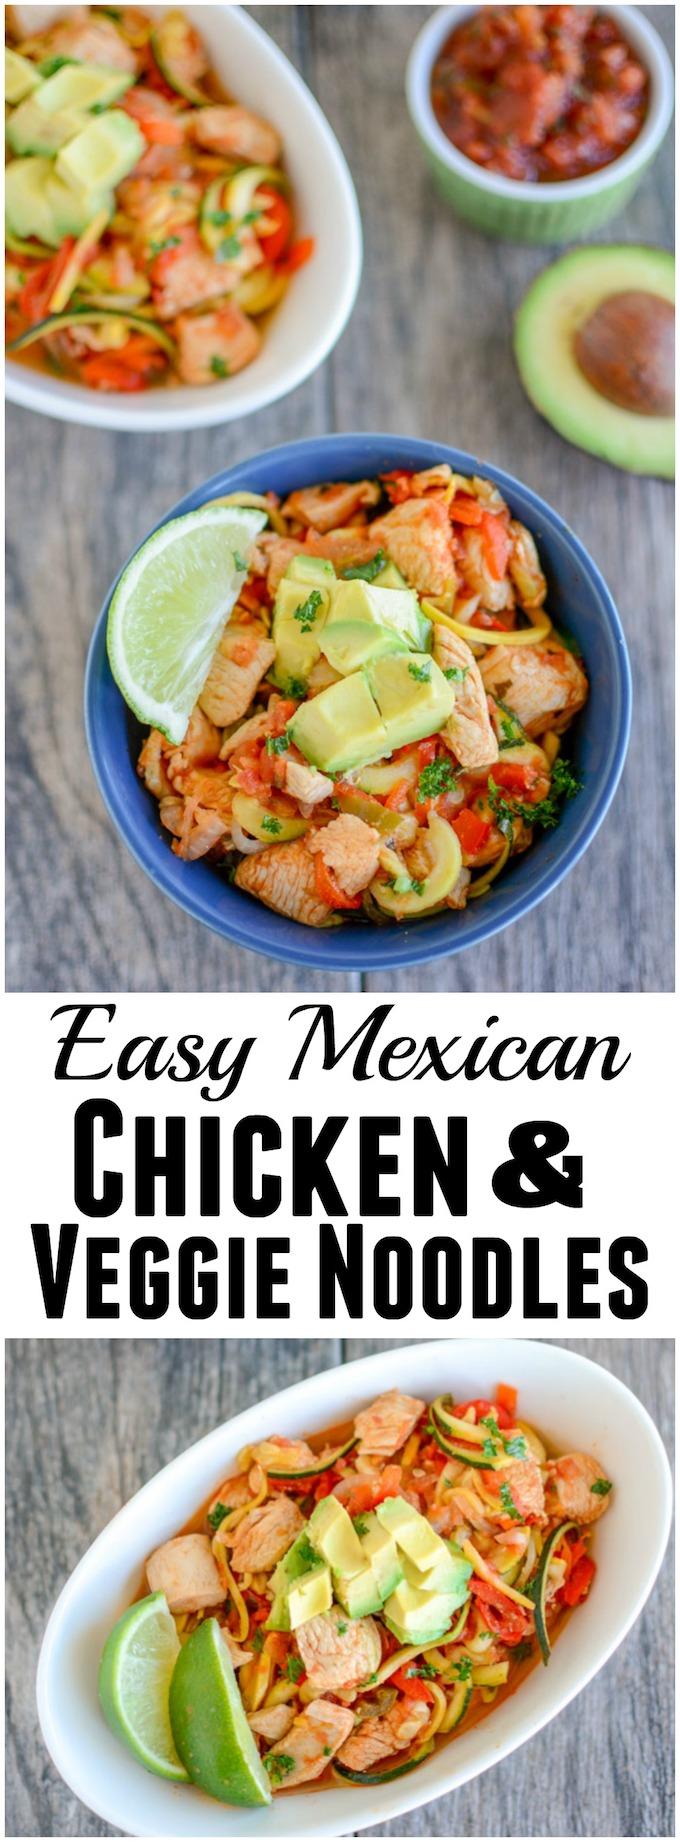 These Mexican Chicken and Veggie Noodle Bowls are so easy and come together in under 20 minutes for a quick, healthy dinner. They're a fun change from traditional tacos or fajitas.